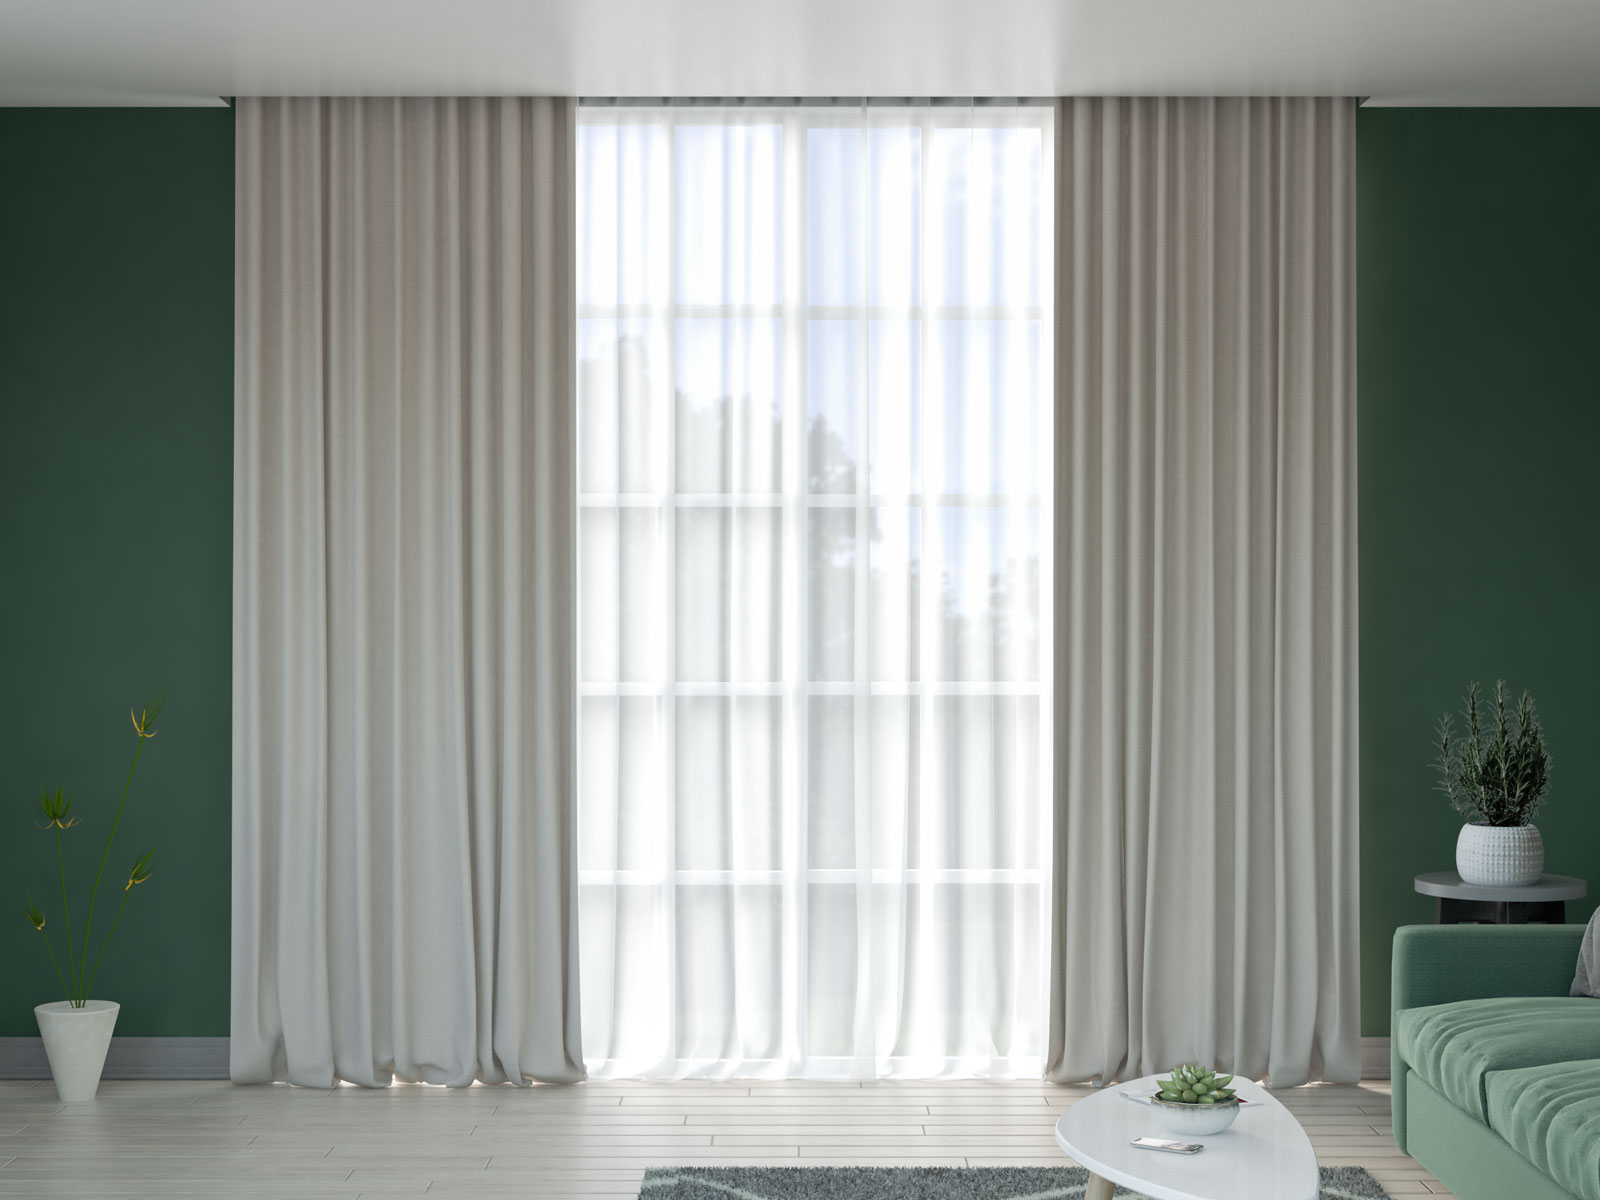 Dark green wall with beige curtains